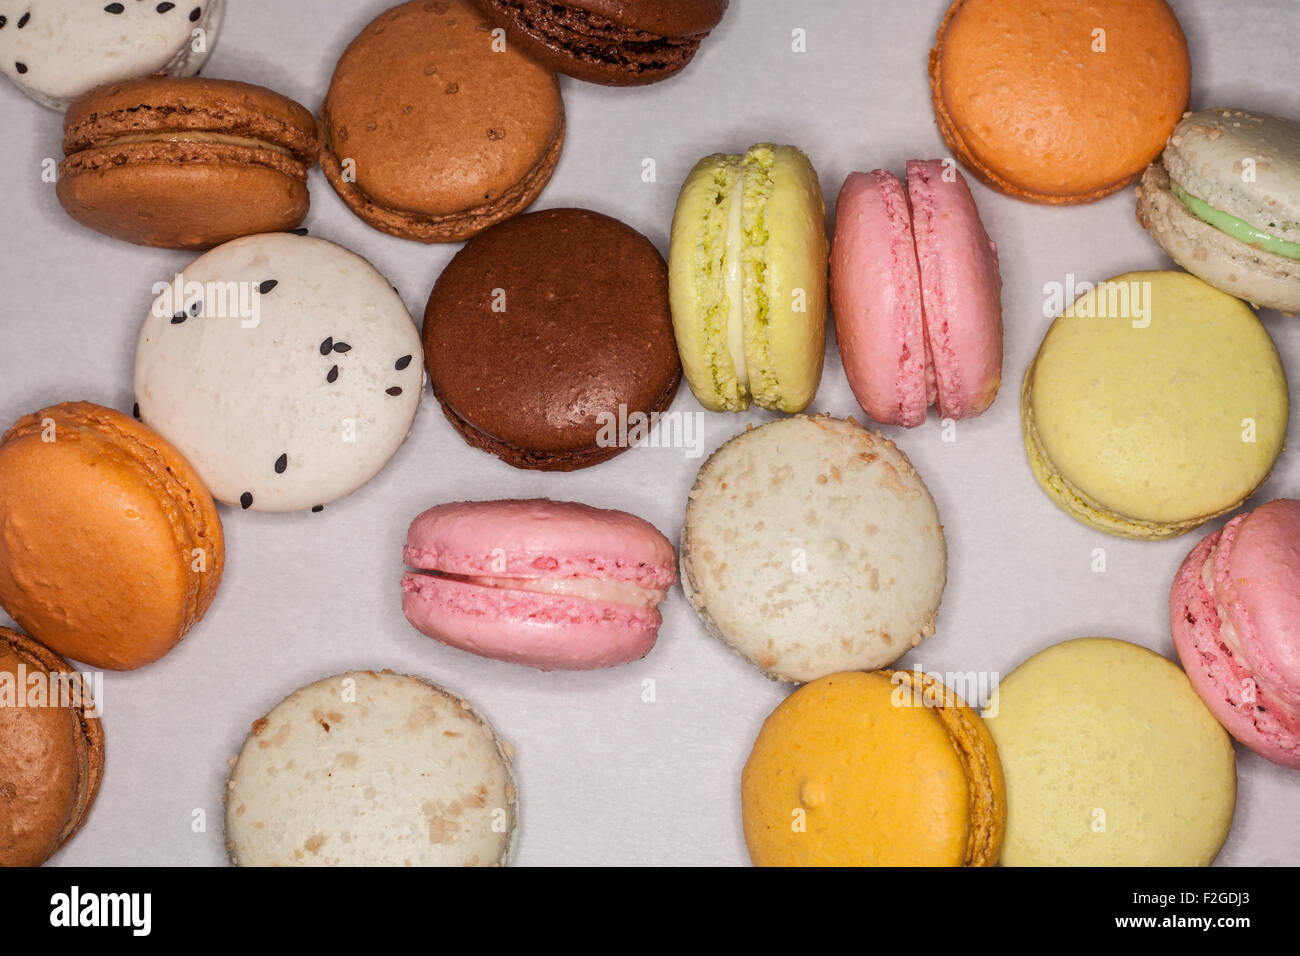 various macaroons flavors and colors of macaroons, on a white background Stock Photo